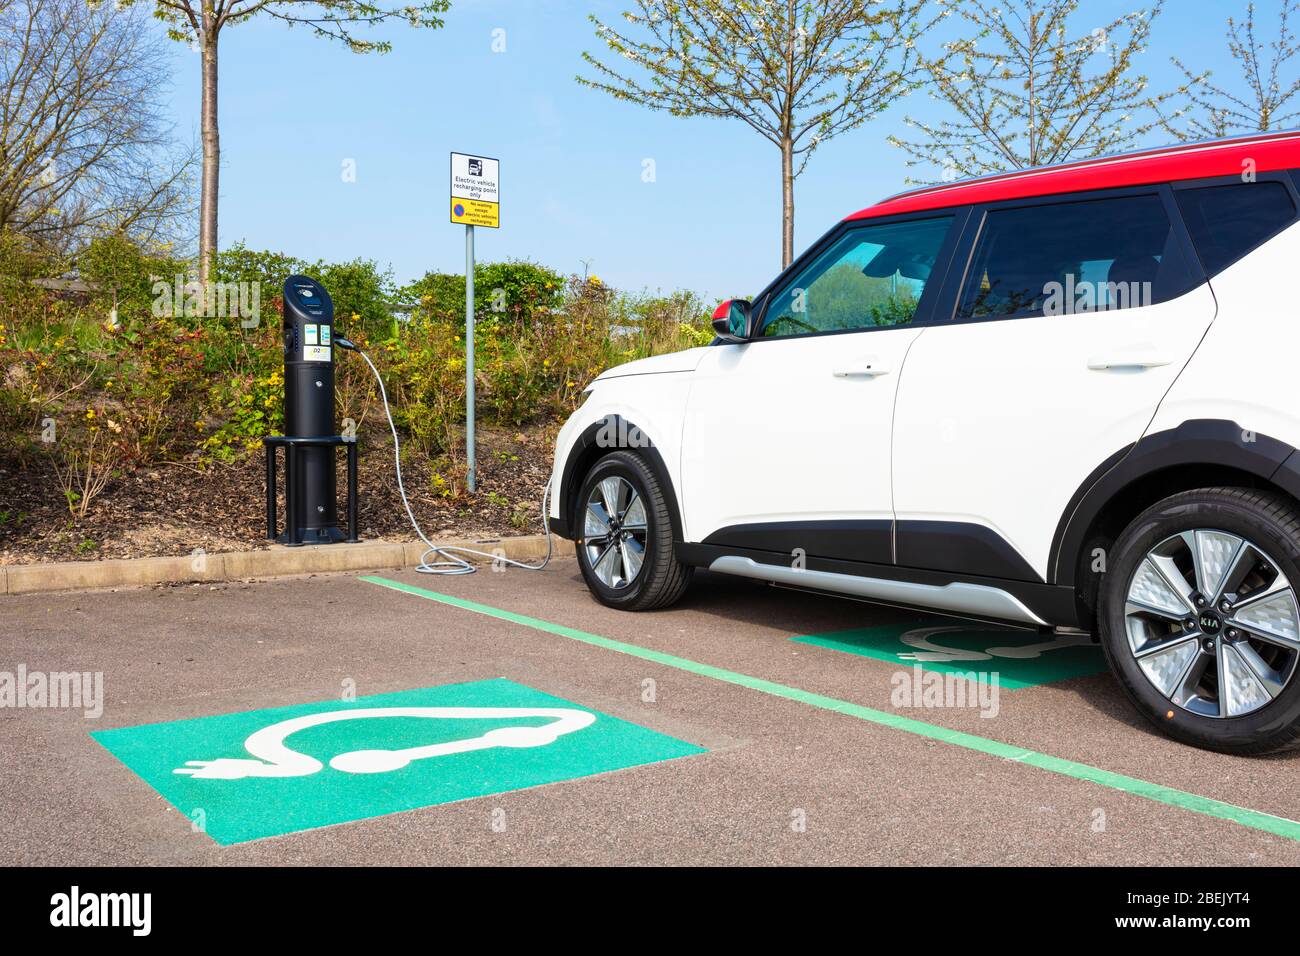 electric car Kia E Soul march 2020 electric car charging at a public electric car charger parked in electric car charging parking space UK Stock Photo